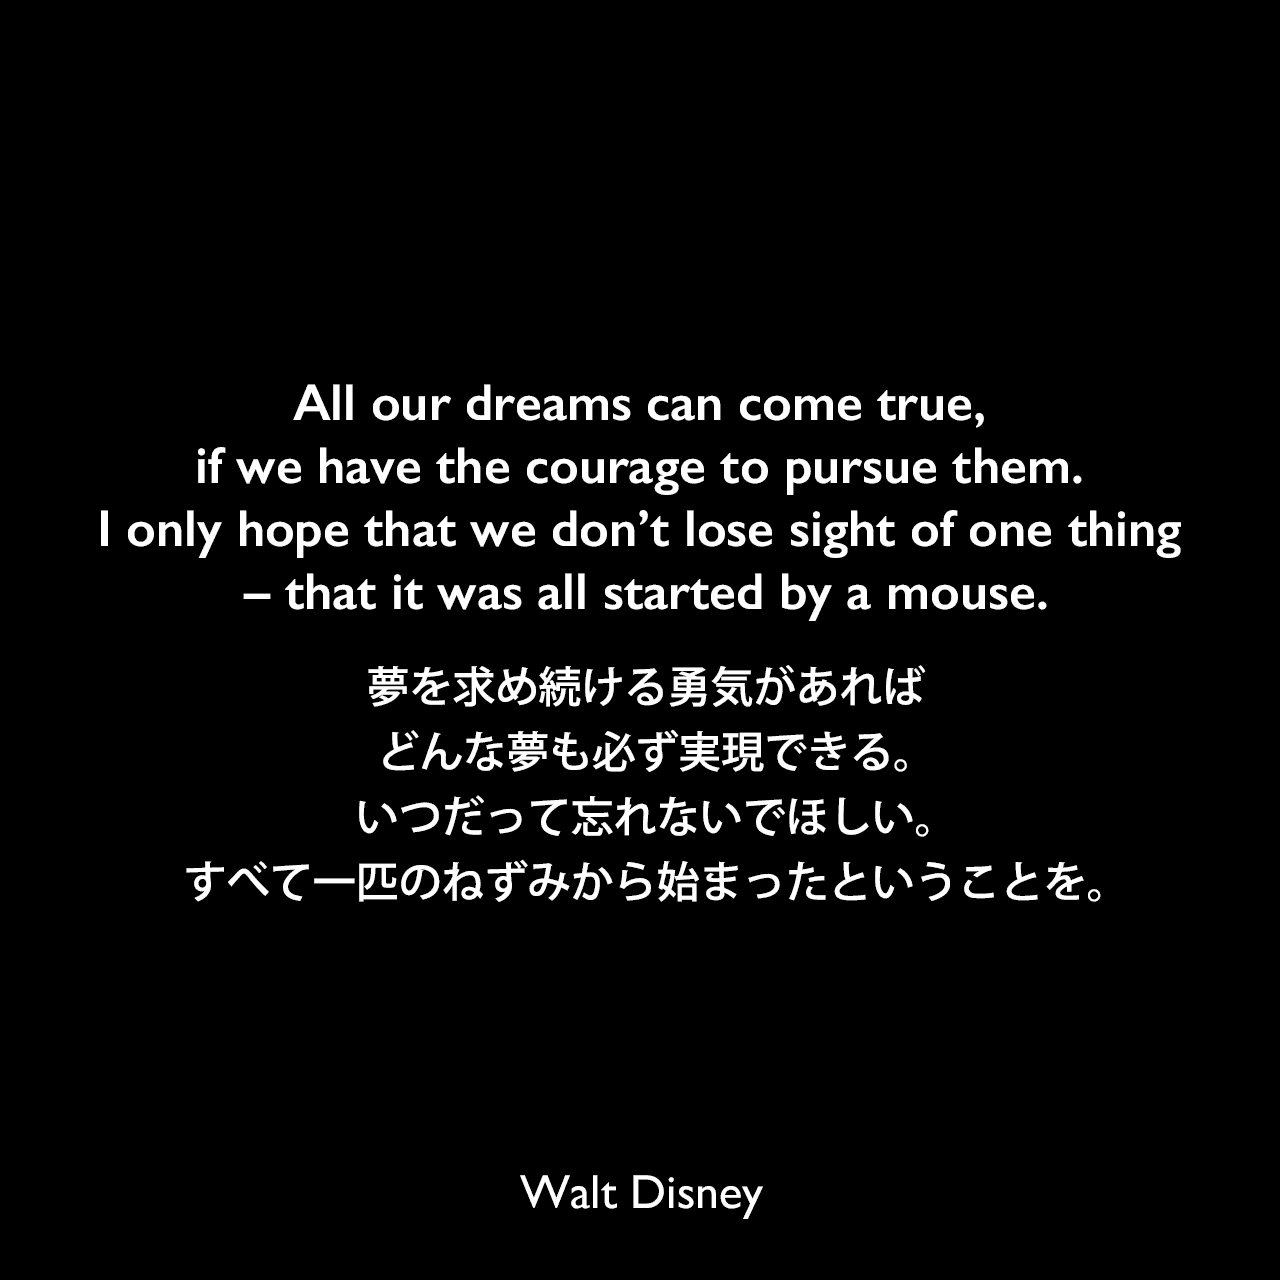 All our dreams can come true, if we have the courage to pursue them. I only hope that we don’t lose sight of one thing – that it was all started by a mouse.夢を求め続ける勇気があれば、どんな夢も必ず実現できる。いつだって忘れないでほしい。すべて一匹のねずみから始まったということを。Walt Disney